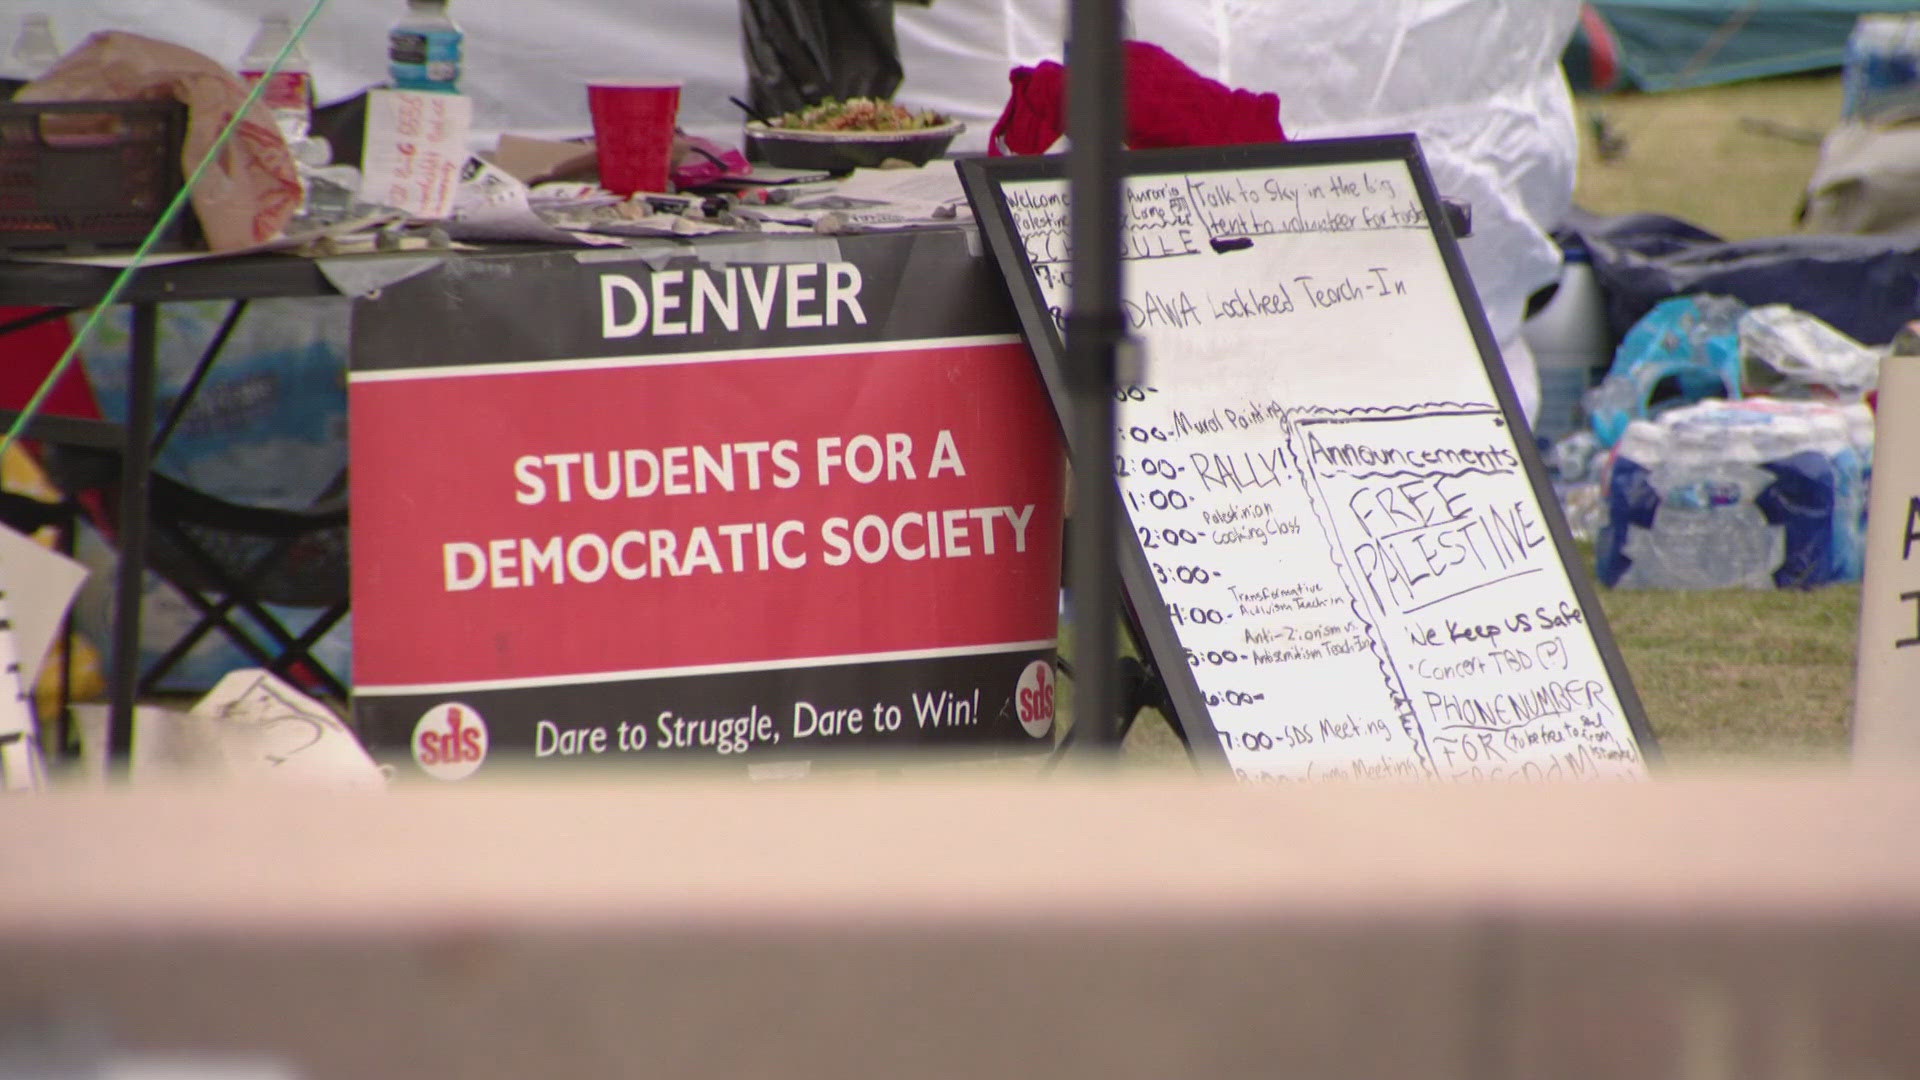 The protesters turned down the offer, and the Auraria Campus encampment was still up after the 5 p.m. Thursday deadline.